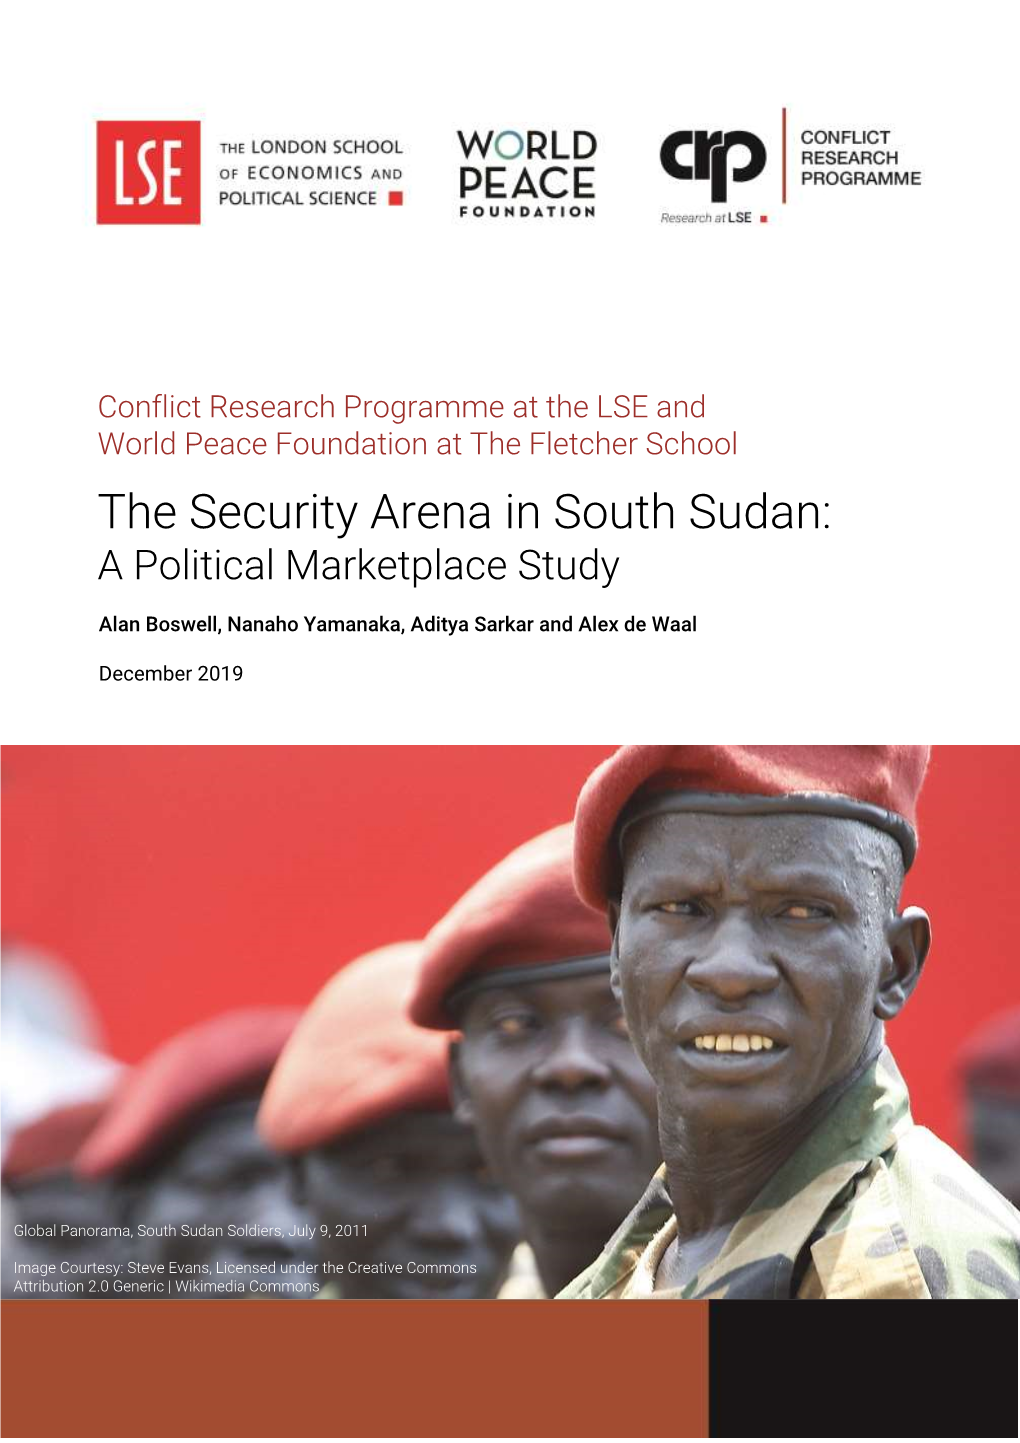 The Security Arena in South Sudan: a Political Marketplace Study